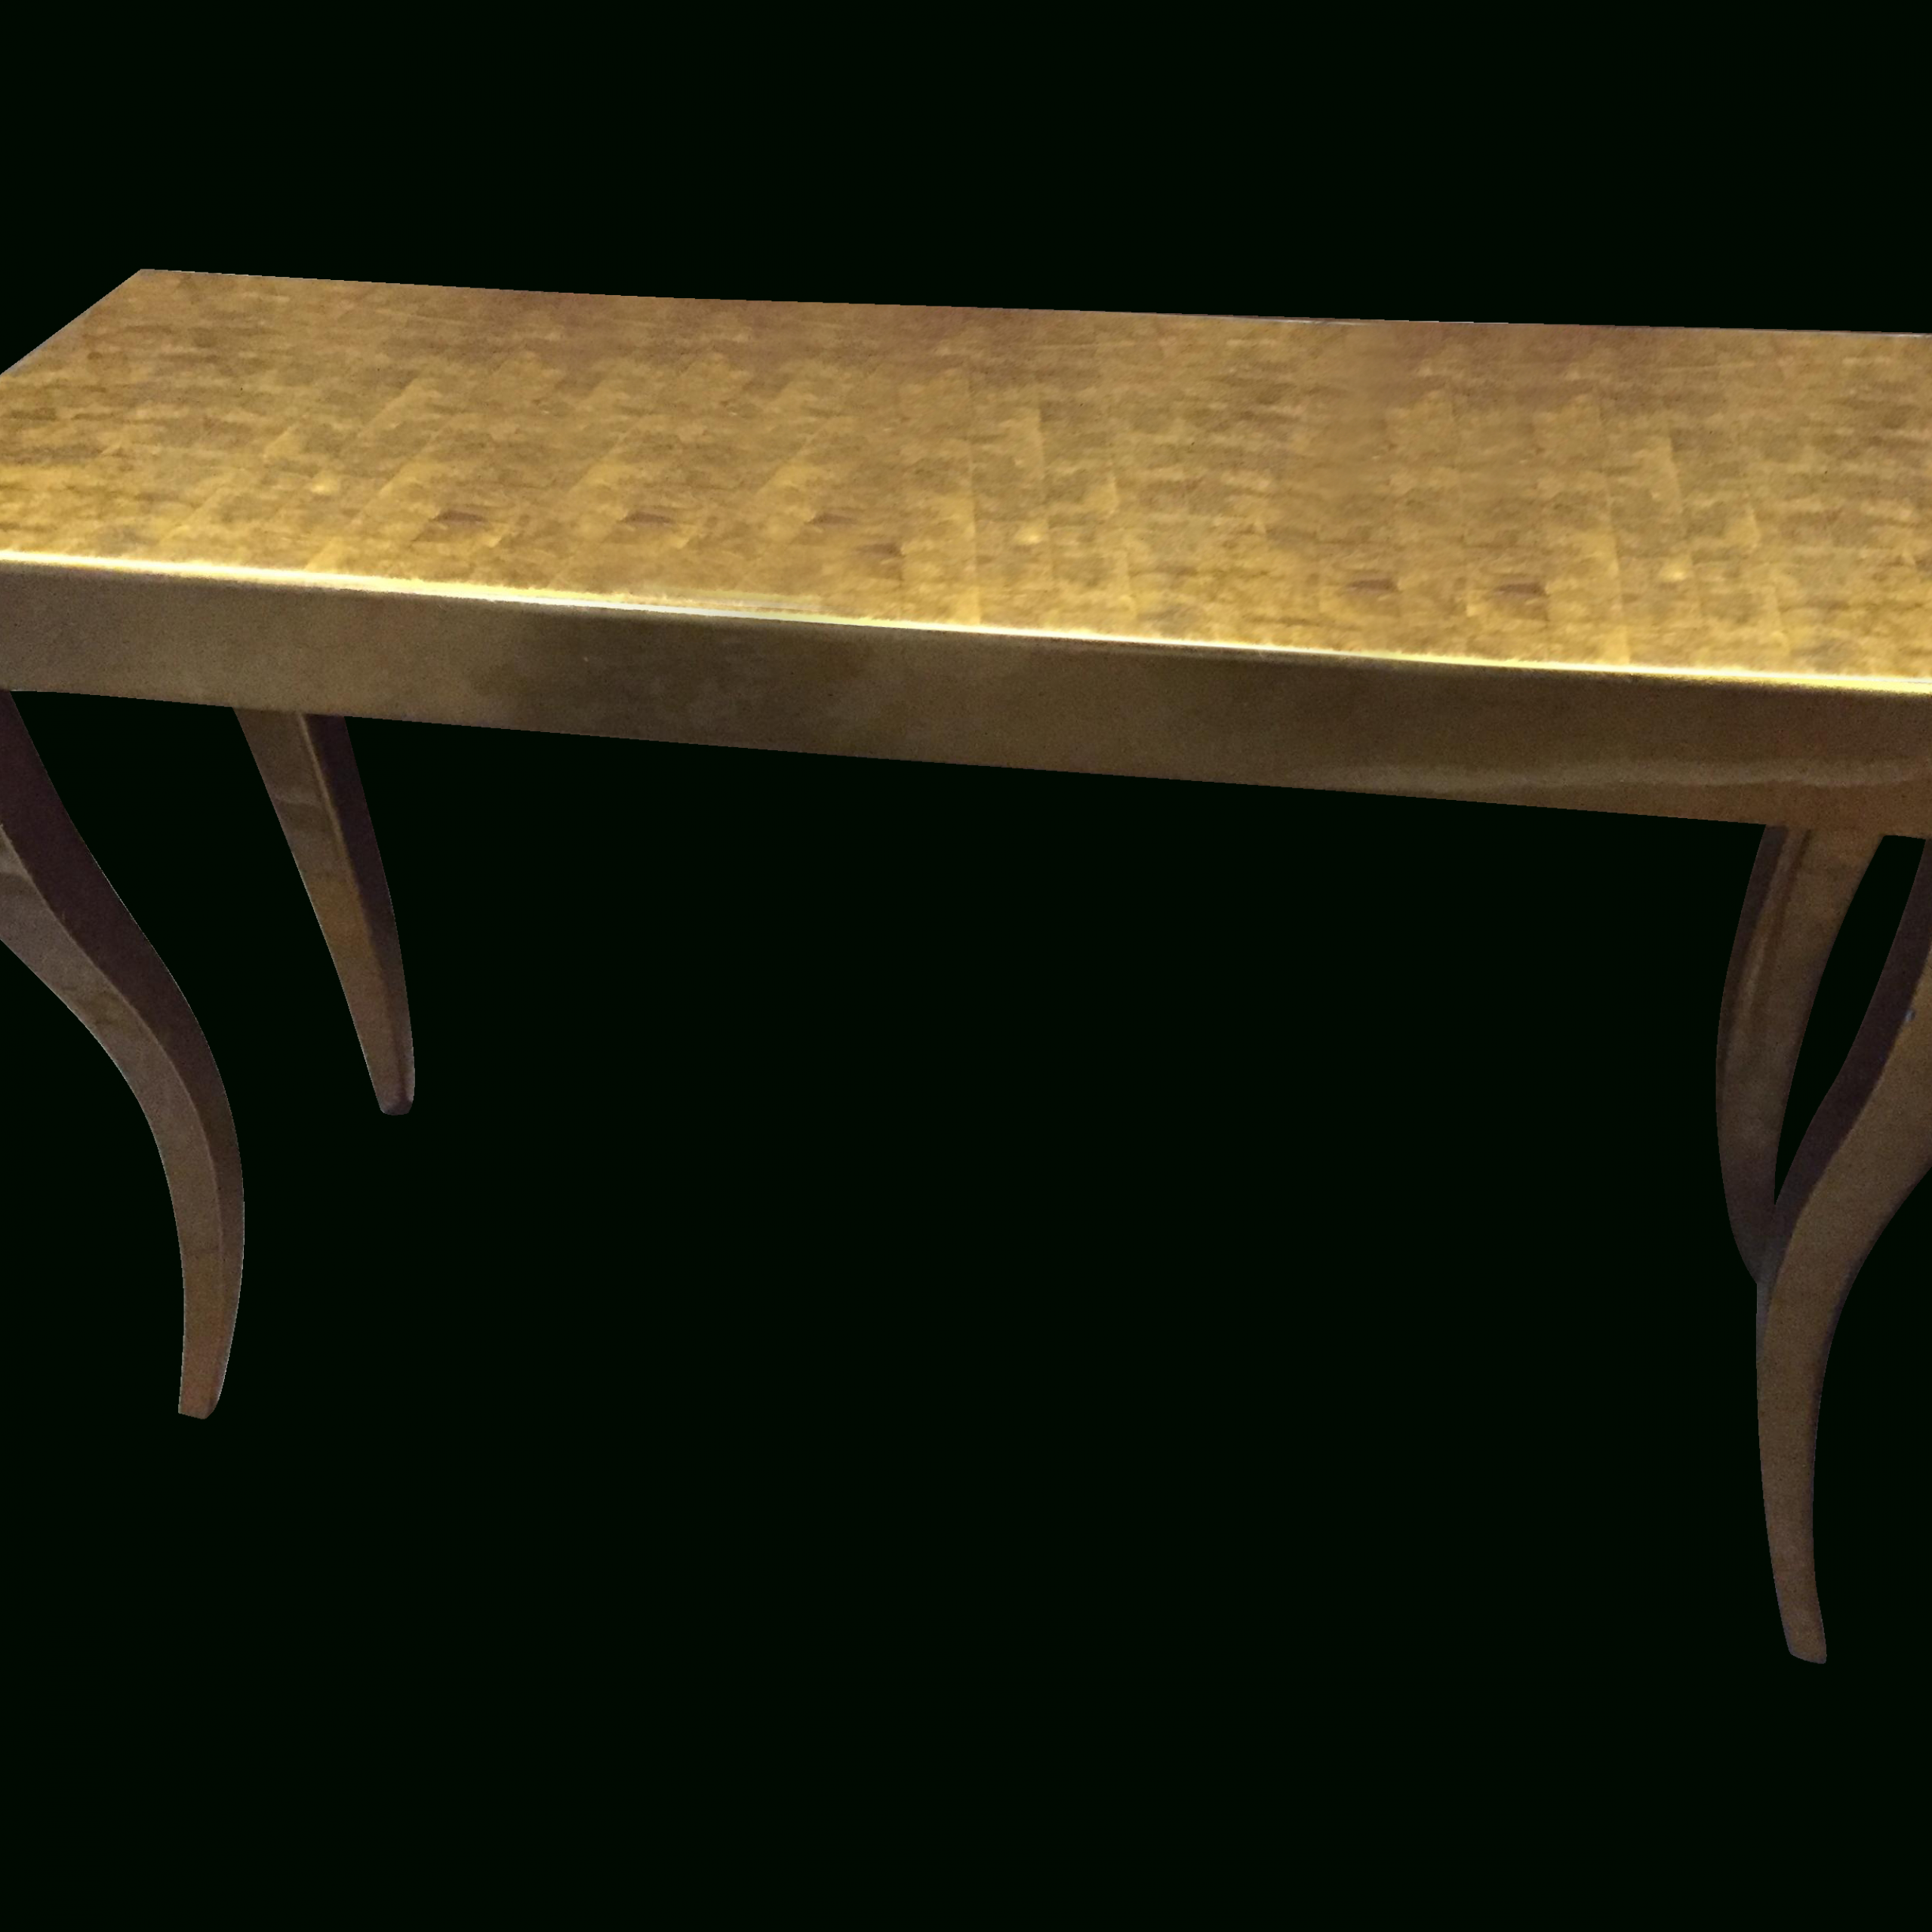 Gold Tone Console Table | Console Table, Table, Gold Console Table In Antiqued Gold Leaf Console Tables (View 5 of 20)